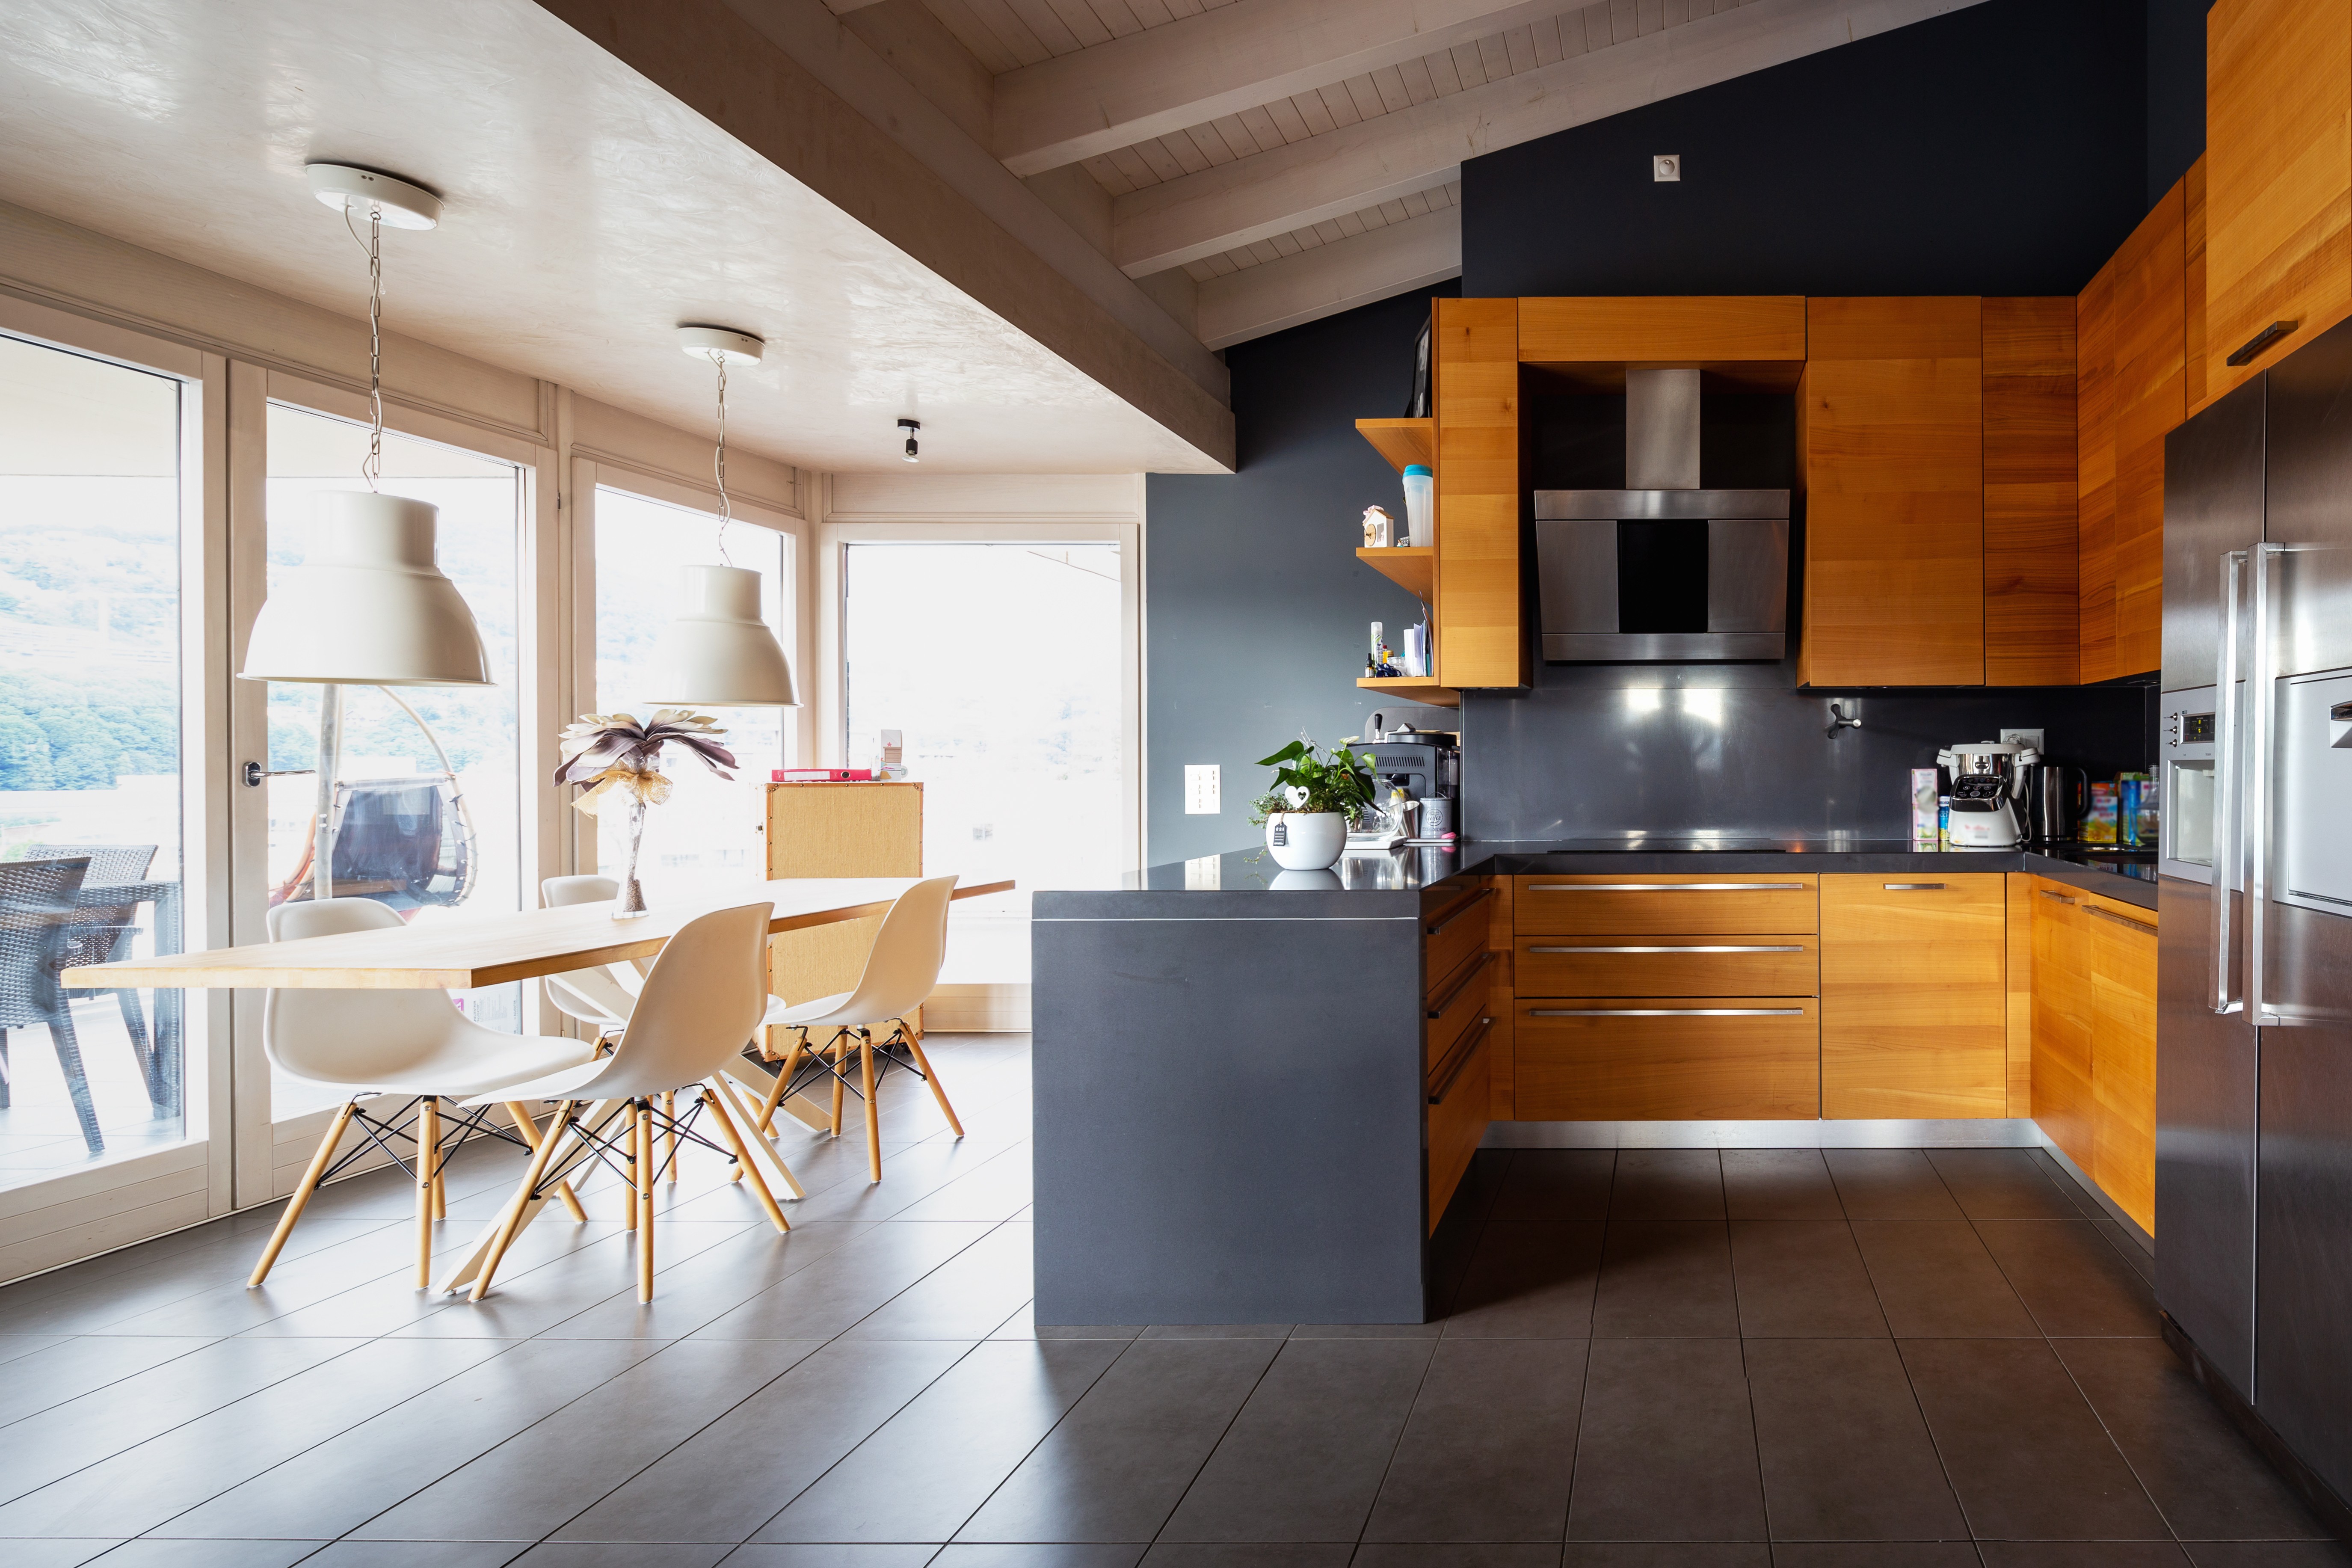 U-Shaped Kitchens Are a Space Saving Design Option for Any Home